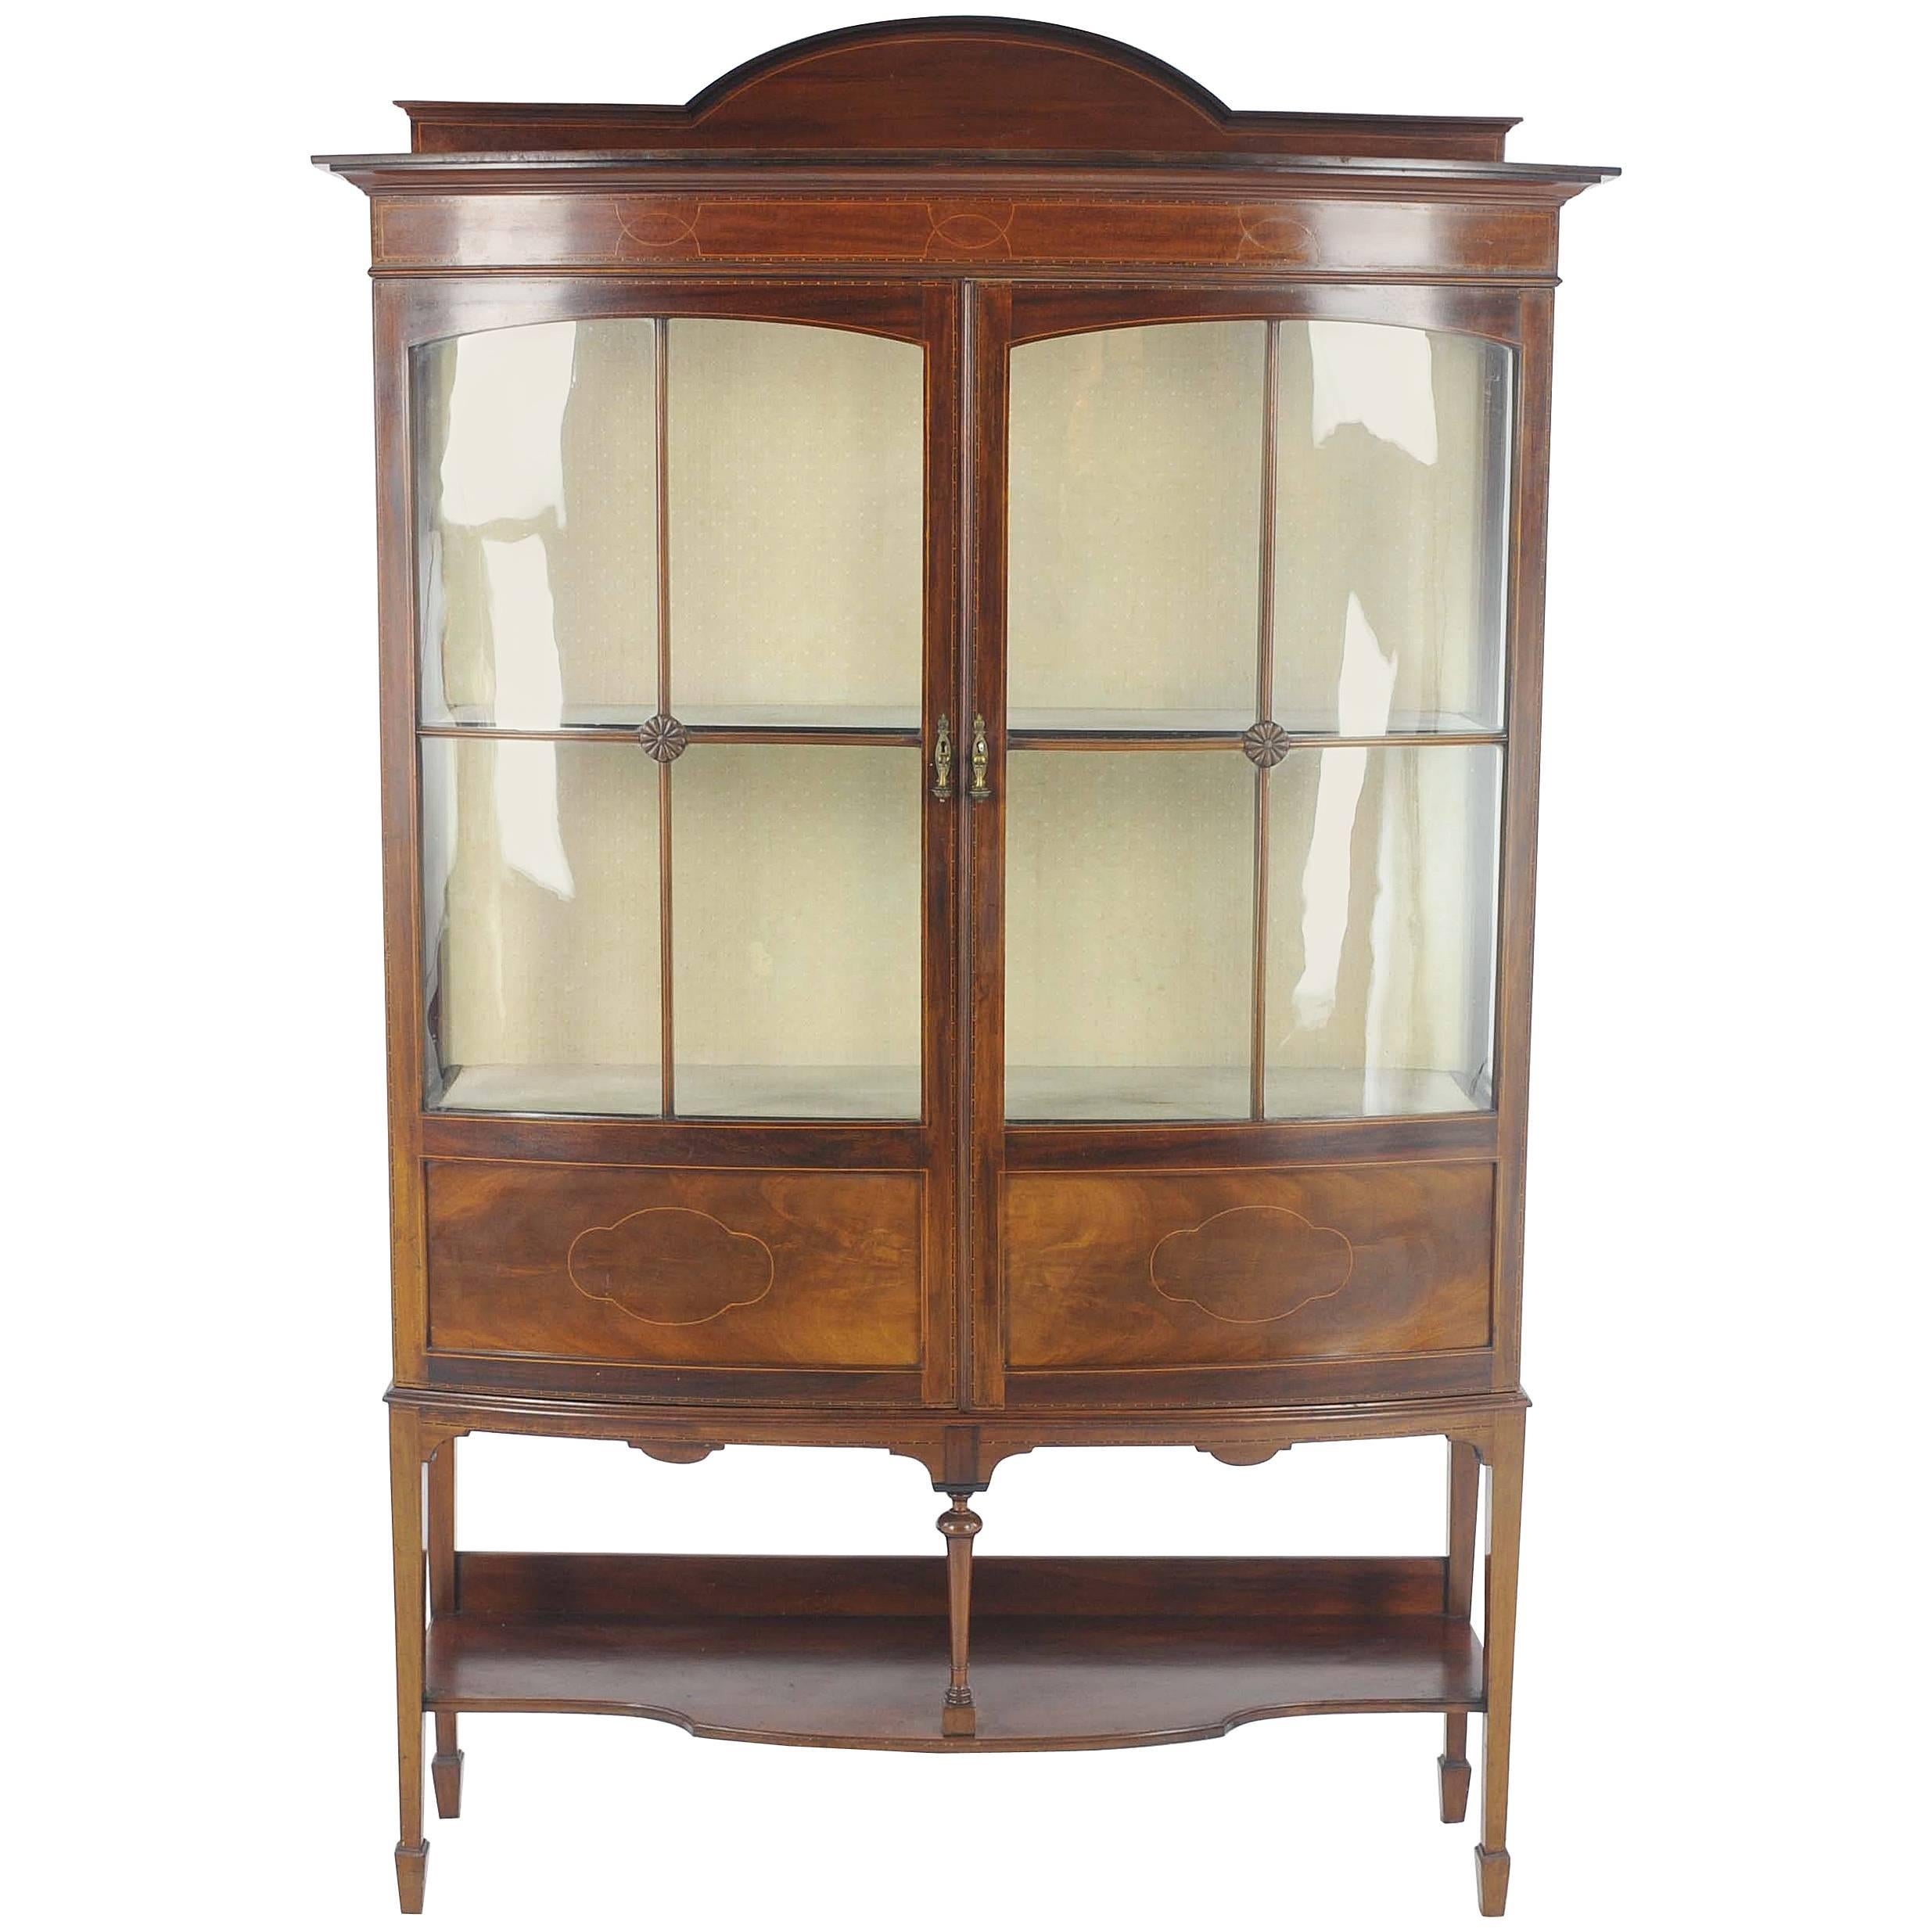 Antique China Cabinet, Inlaid Walnut, Bow Front Cabinet, Scotland, 1910